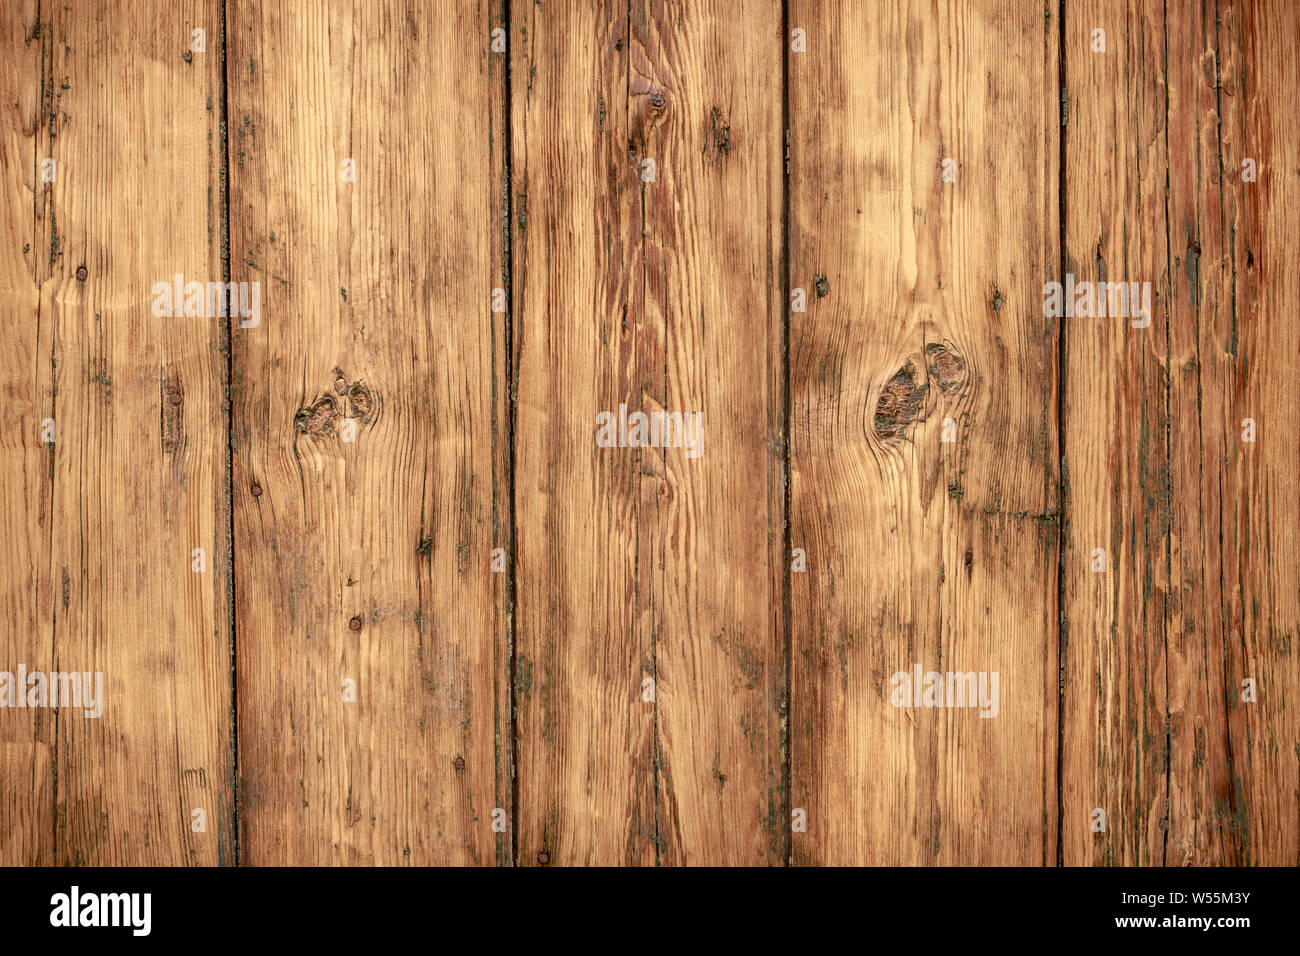 Shabby wooden wall background. Texture of obsolete carpentry wooden boards, panel. Vintage dirty wood floor. Old wooden plank grunge texture. Weathere Stock Photo